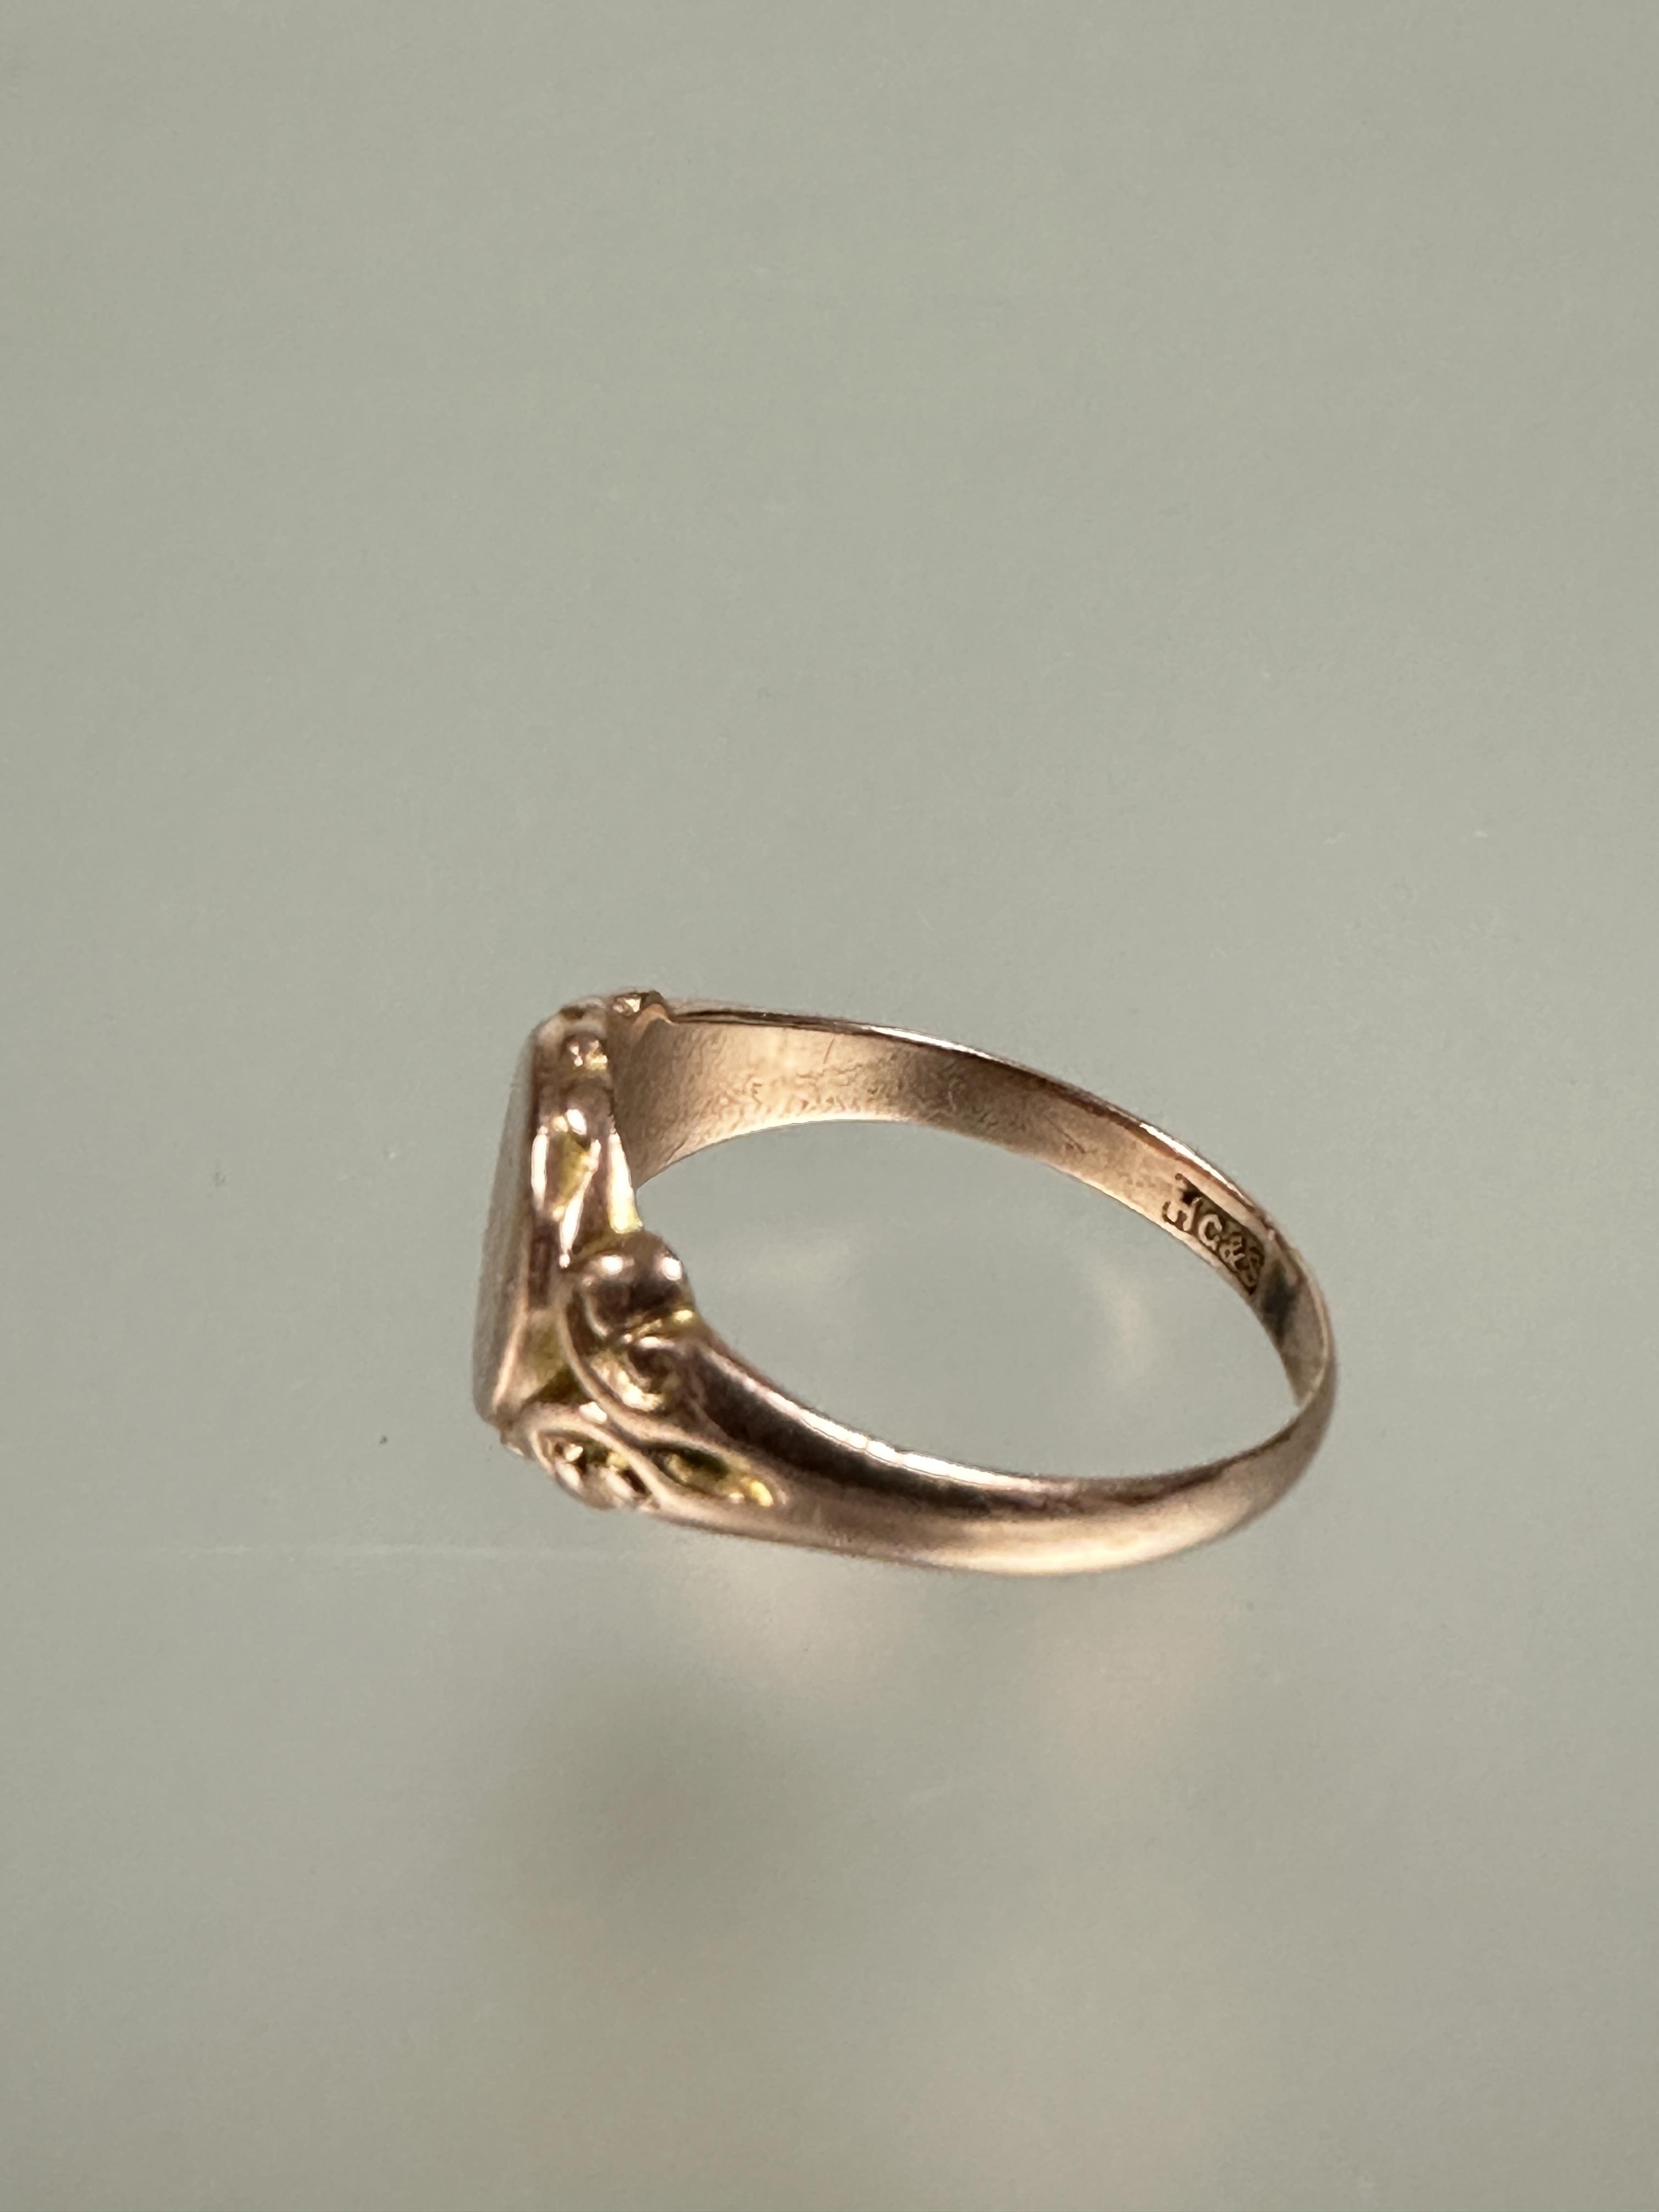 A 9ct rose gold signet ring with engraved intials TCM M 2.96g - Image 2 of 4